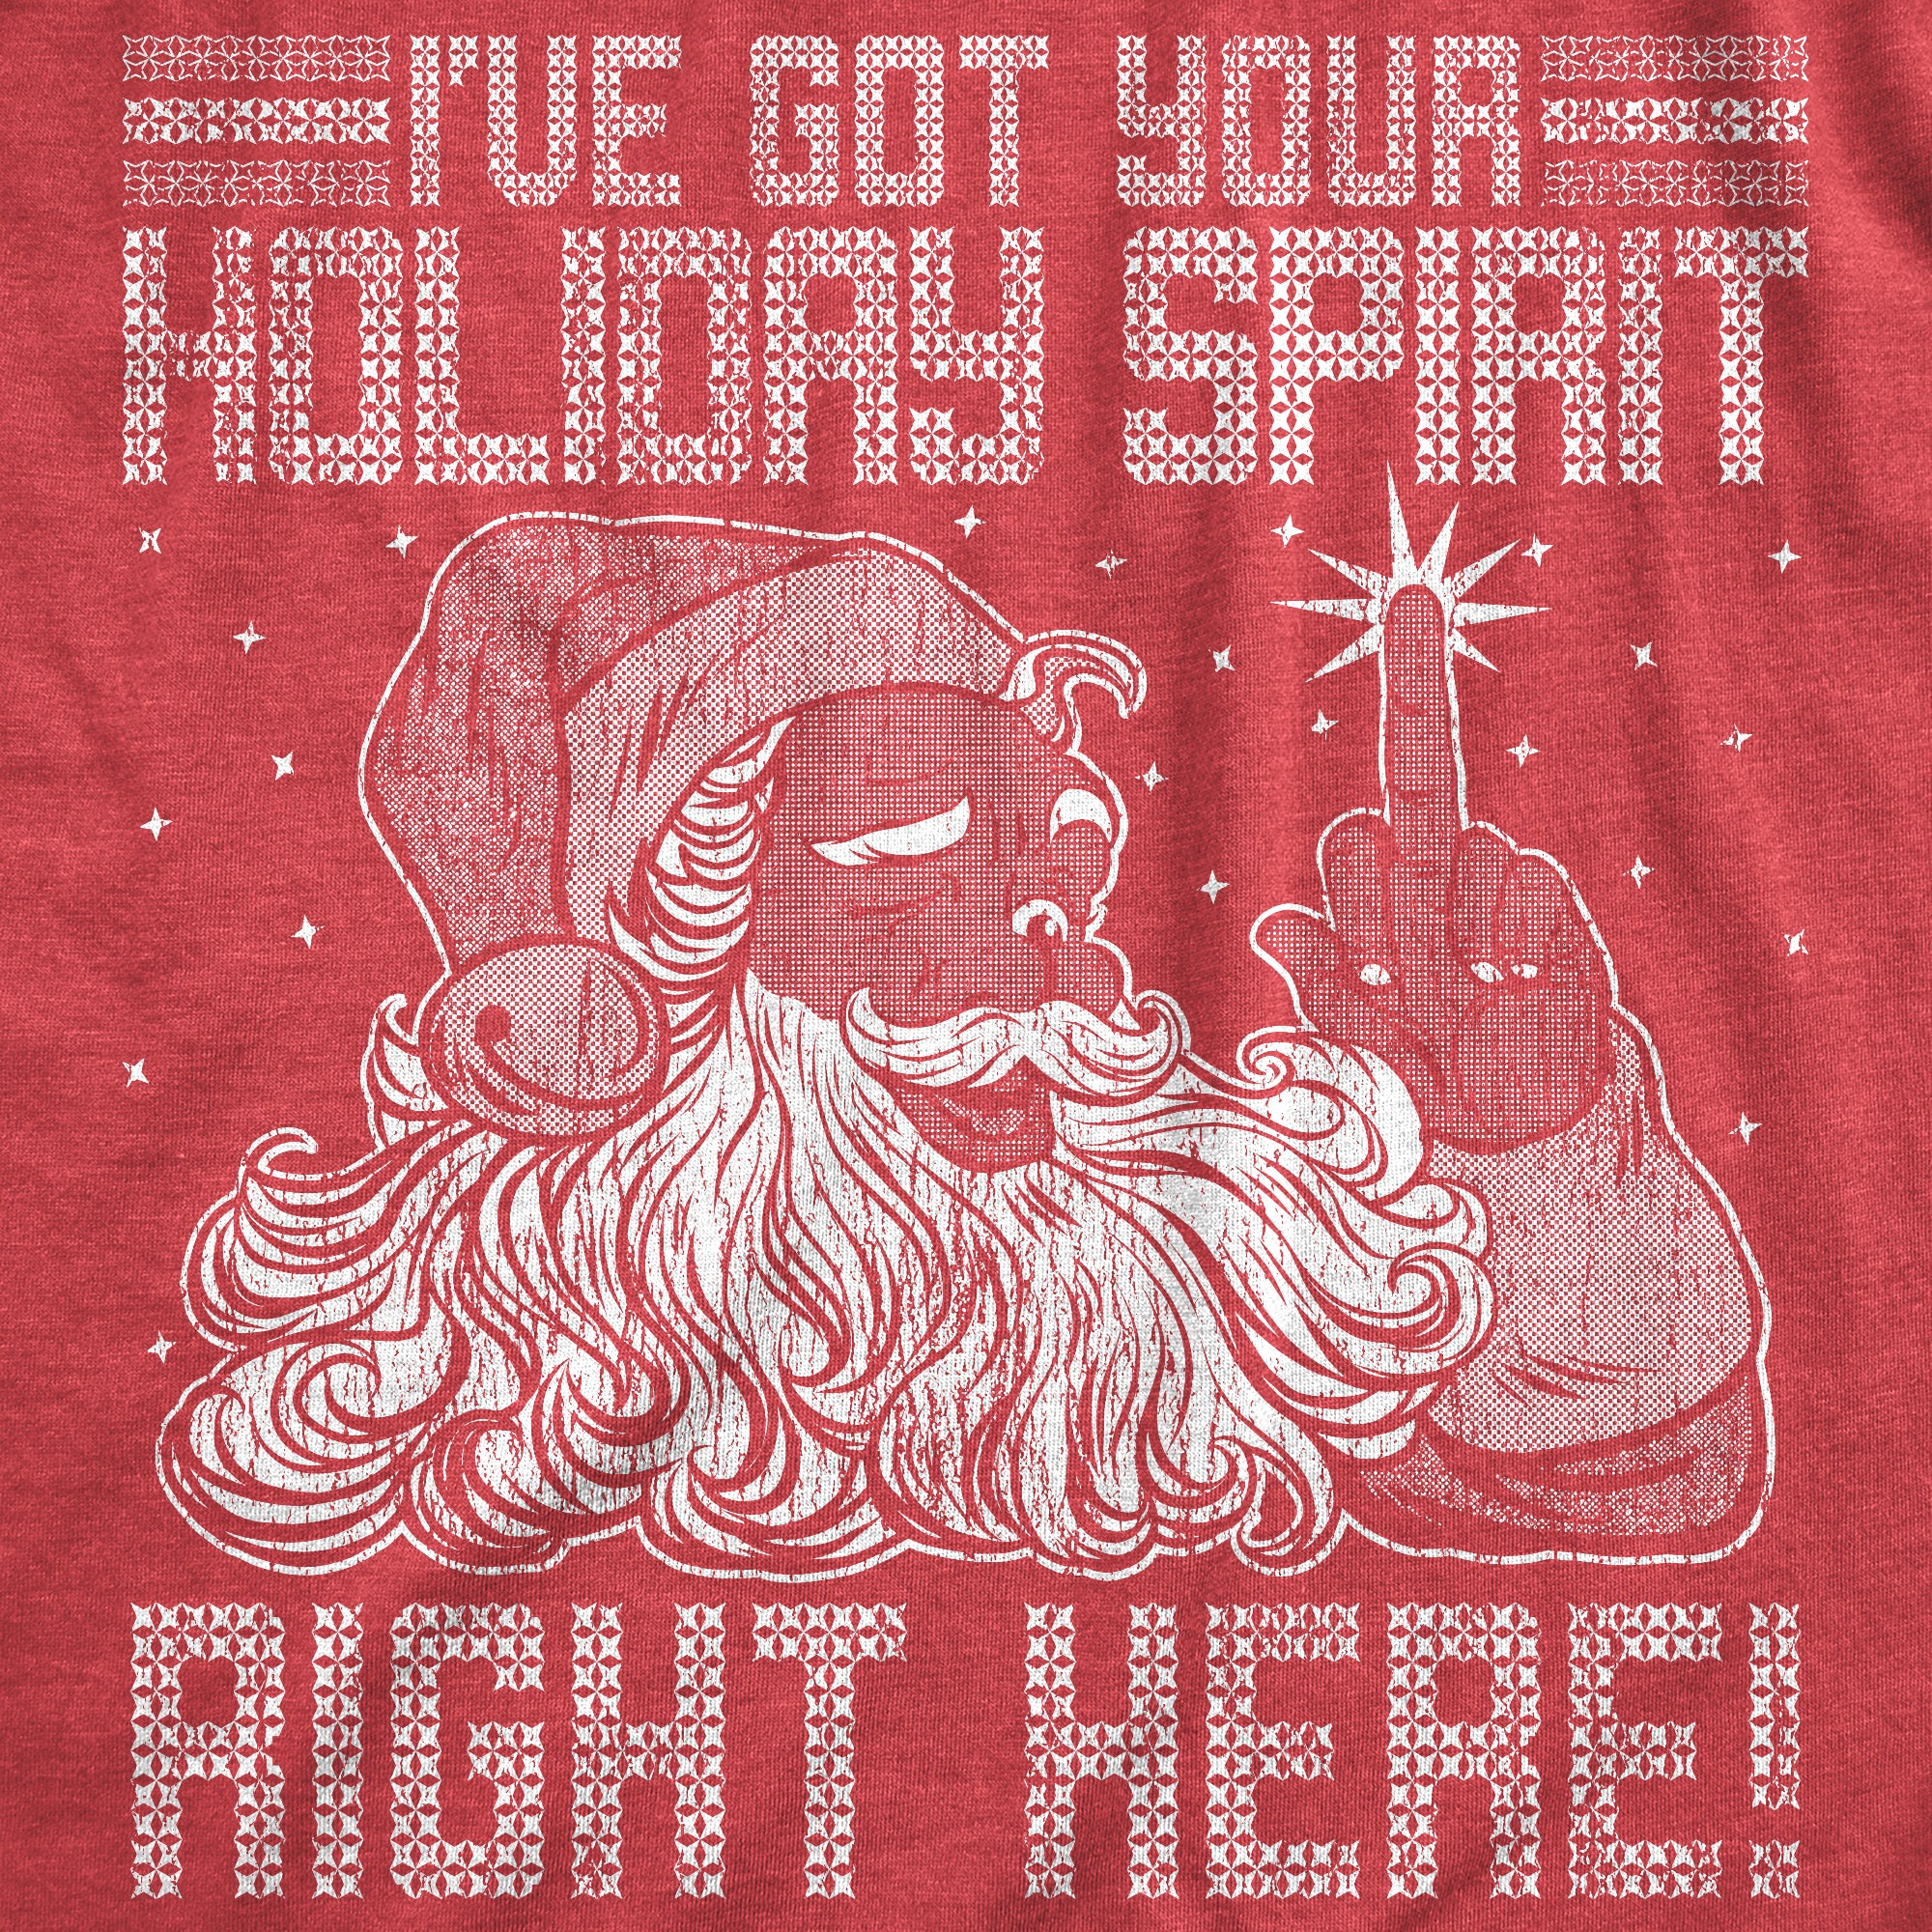 Funny Heather Red - SPIRIT Ive Got Your Holiday Spirit Right Here Mens T Shirt Nerdy Christmas Sarcastic Tee